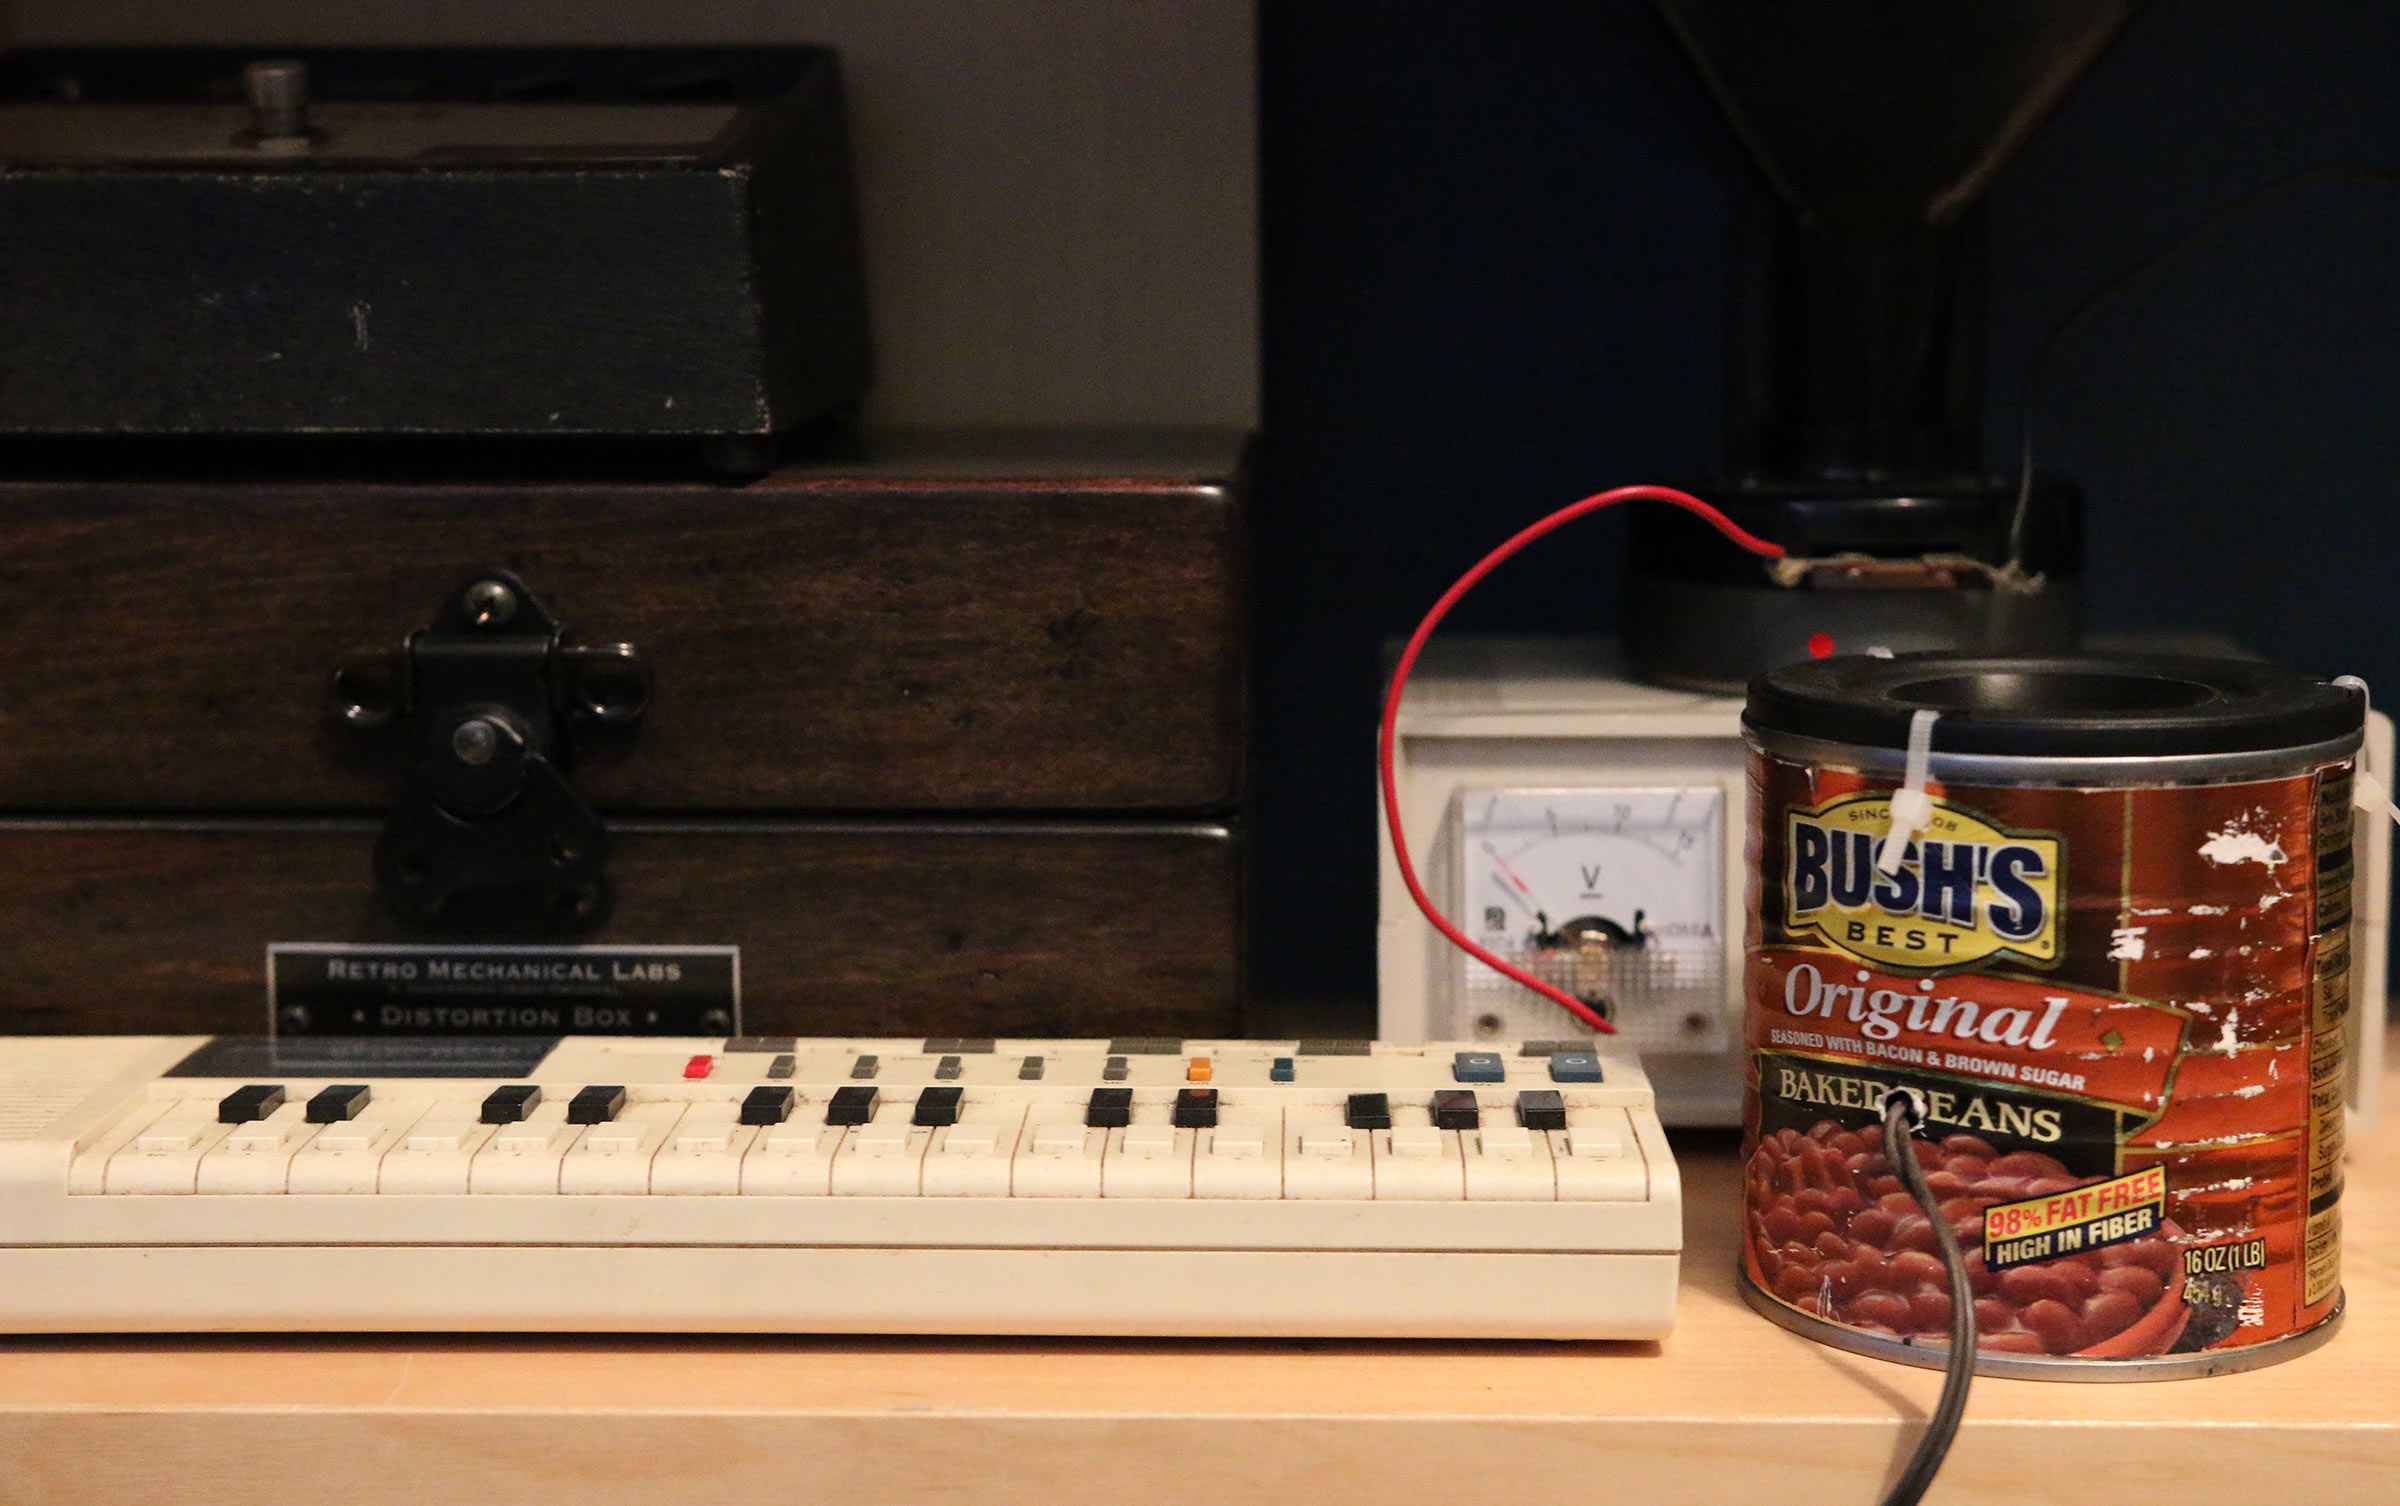 One of Schumacher's synthesizers connected to a speaker made from a Bush Beans can.